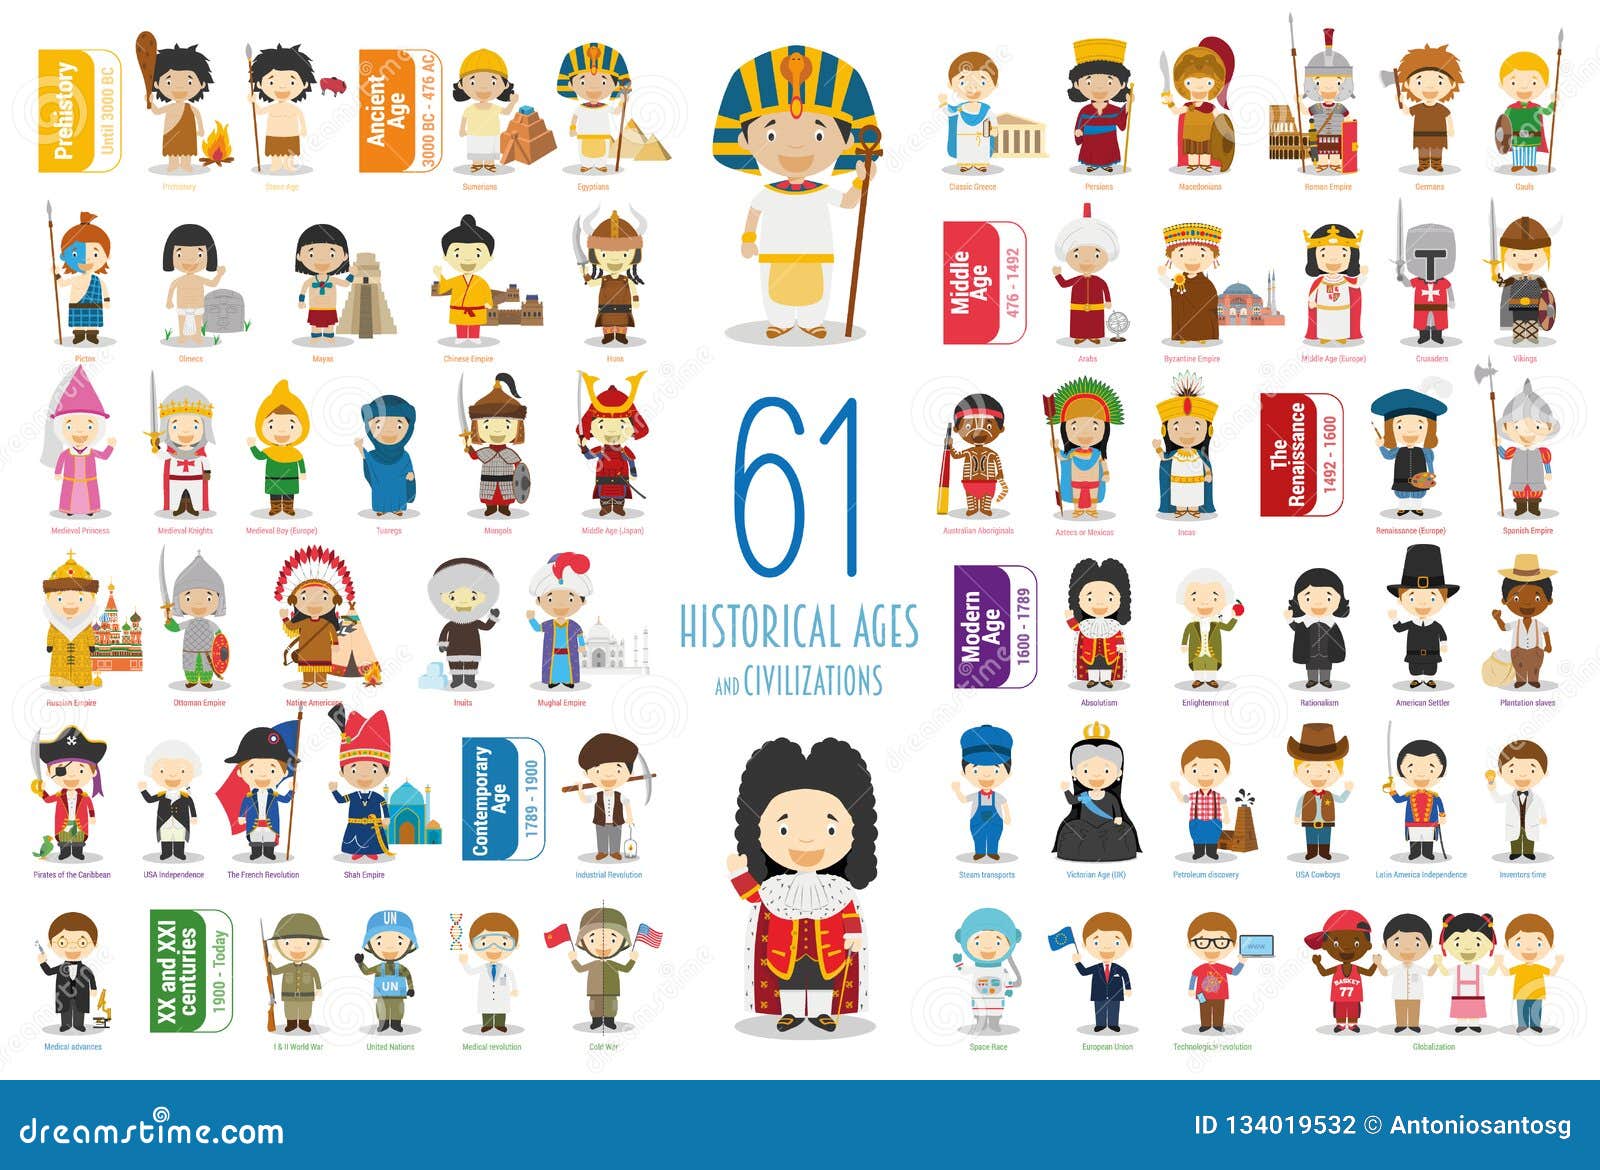 kids  characters collection: set of 61 historical ages and civilizations in cartoon style.